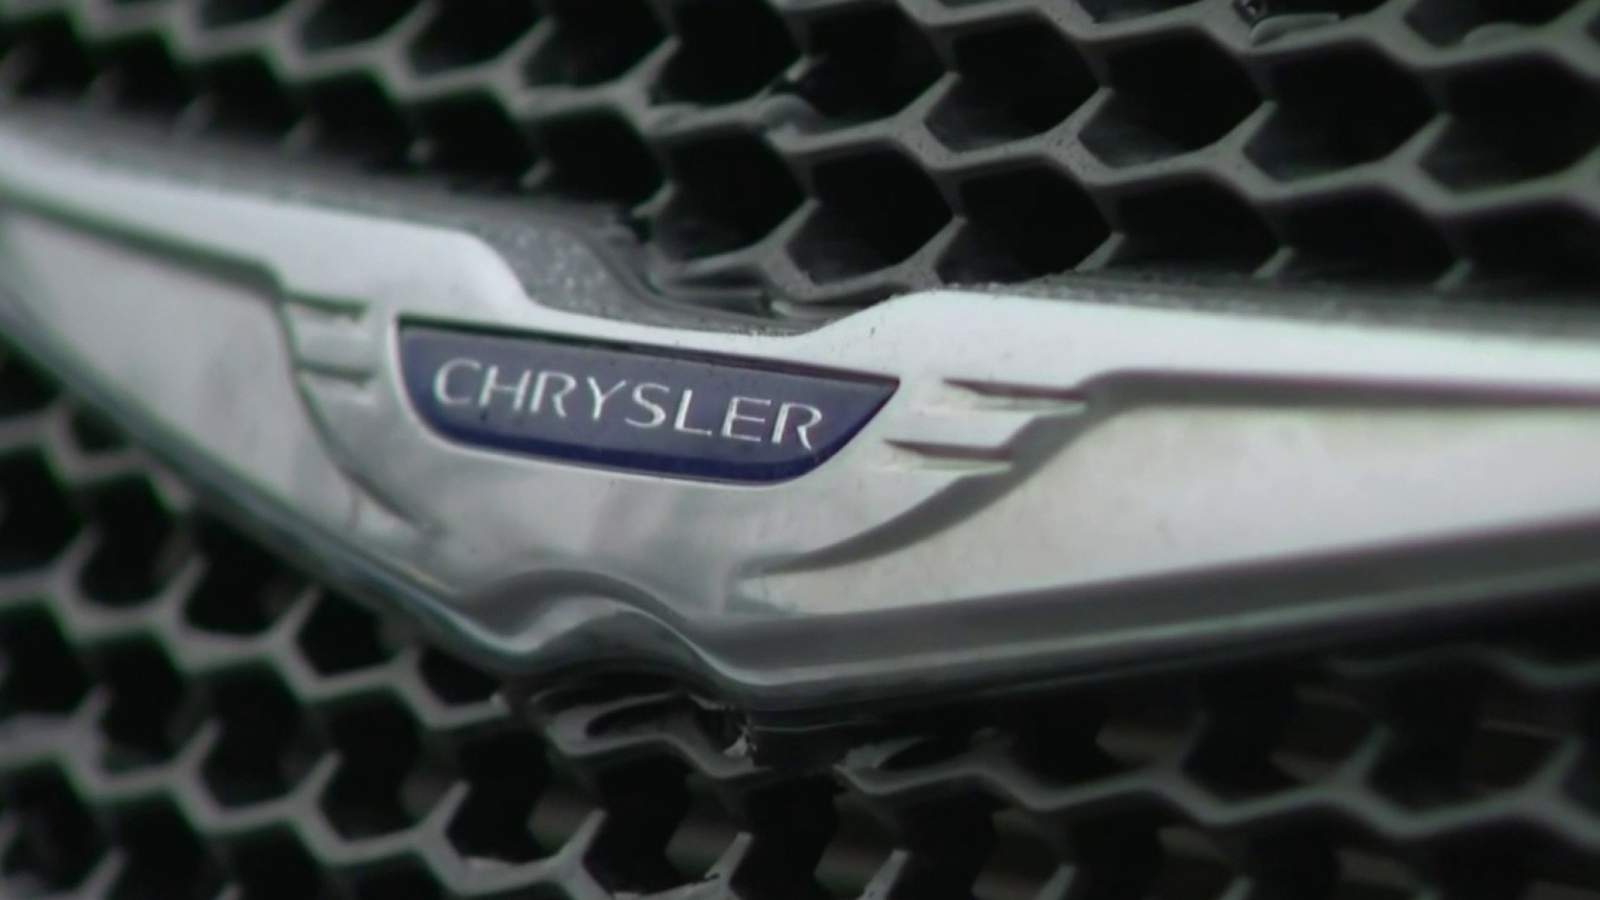 Great grandson of Walter Chrysler worries about fate of automaker